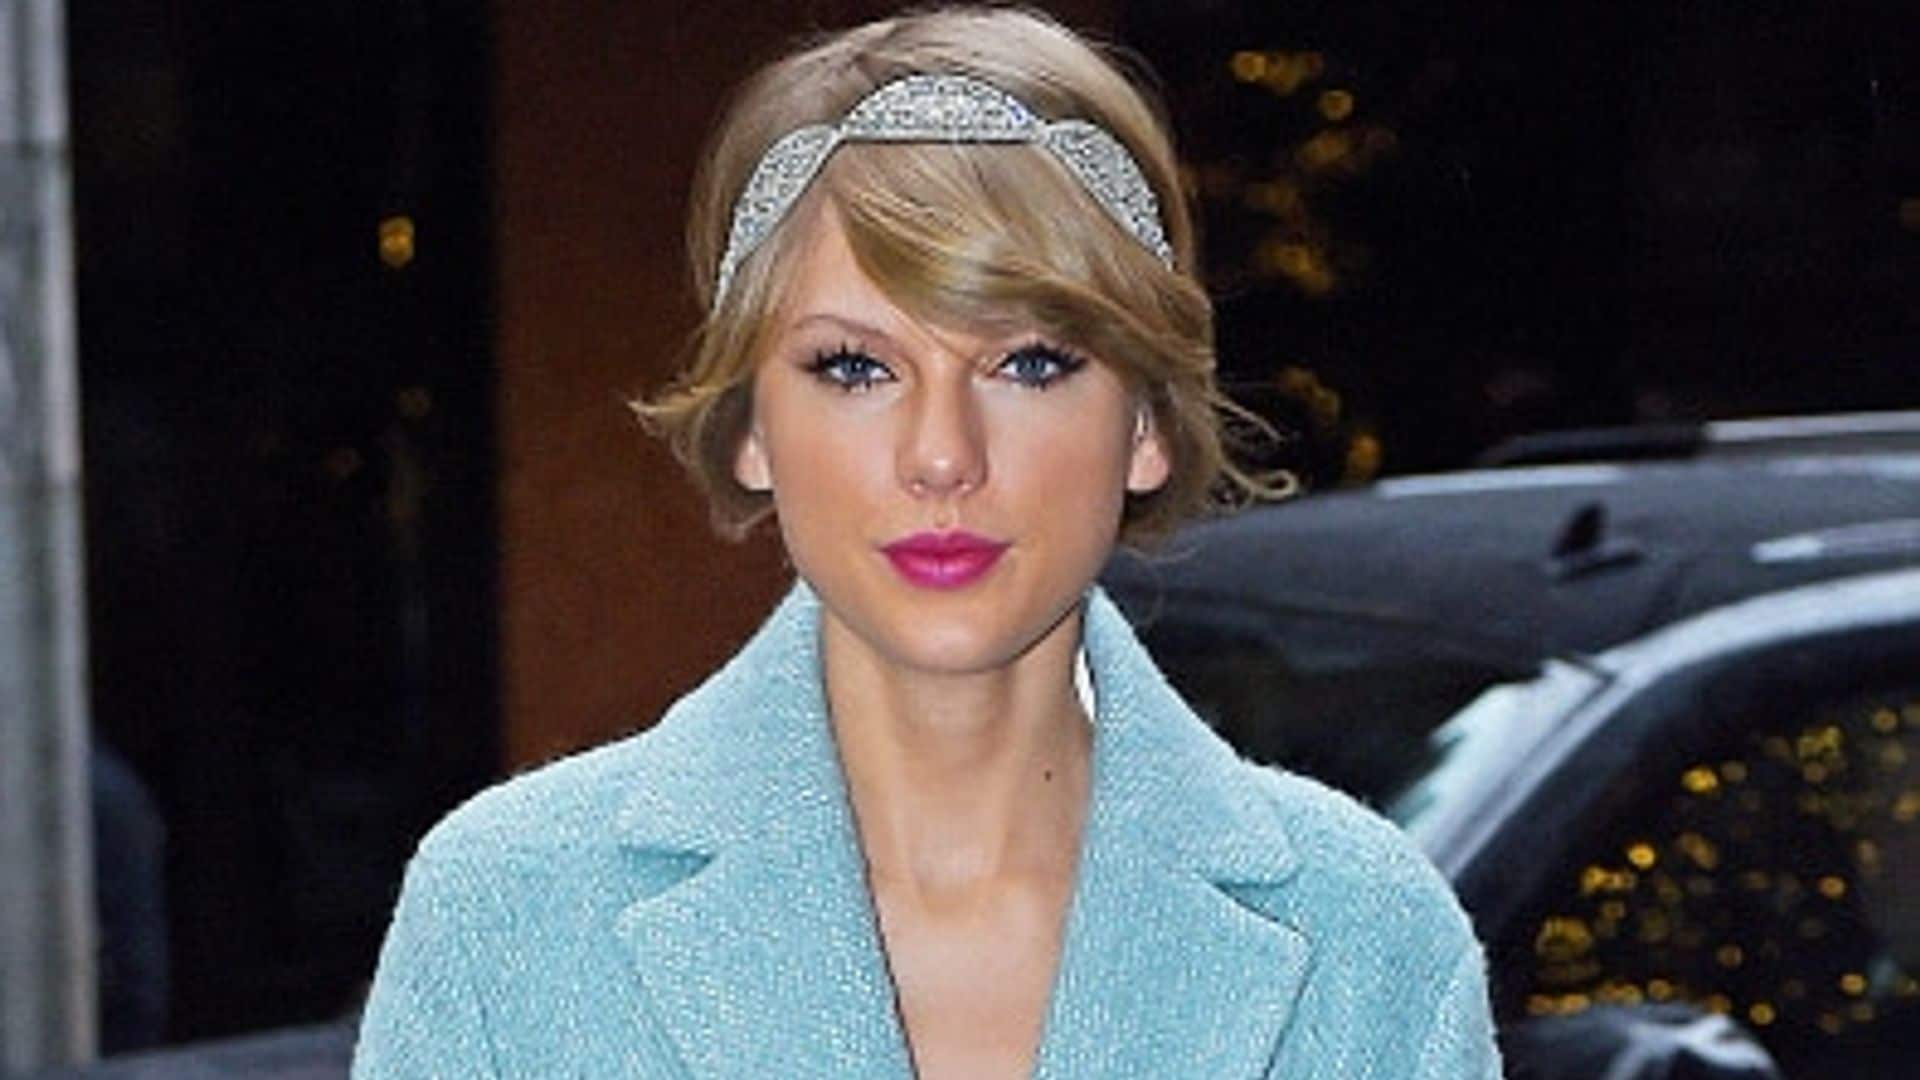 Taylor Swift gives back to fans in sweetest way